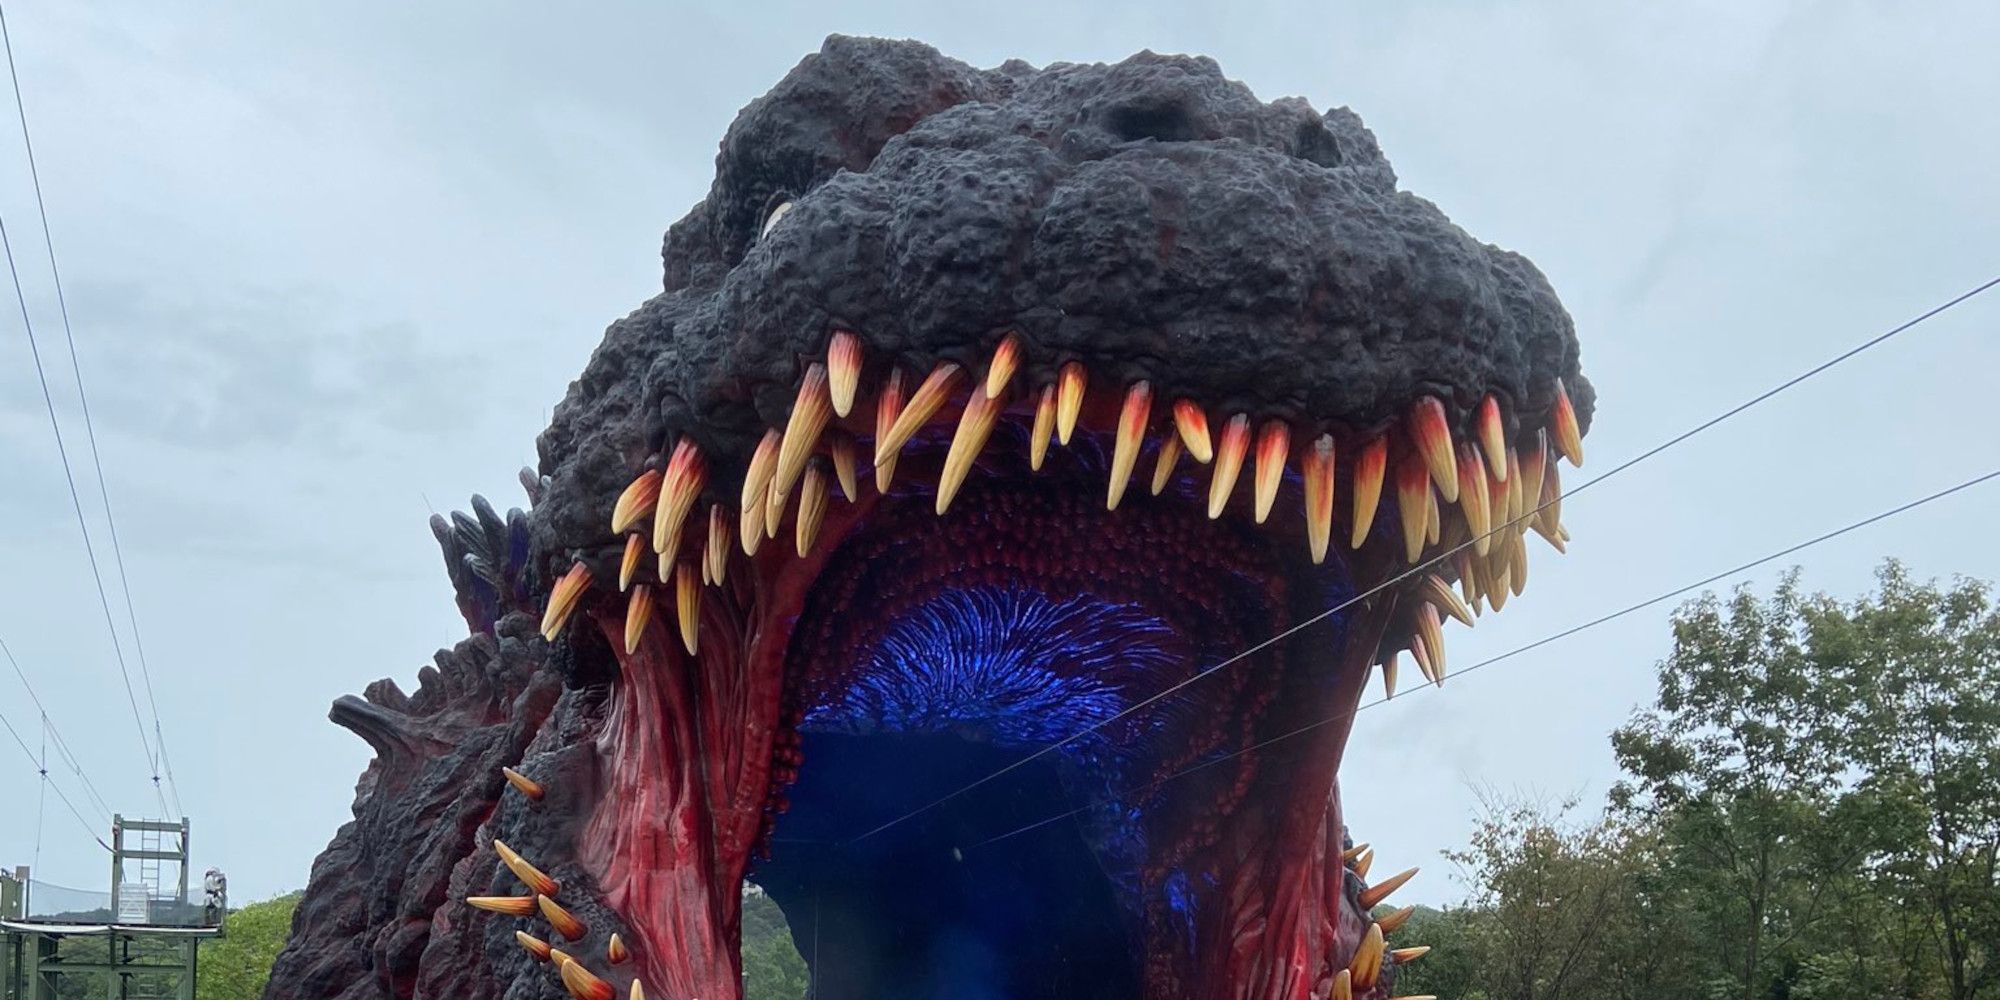 Life Size Godzilla Is The Crown Jewel Of New Japanese Theme Park